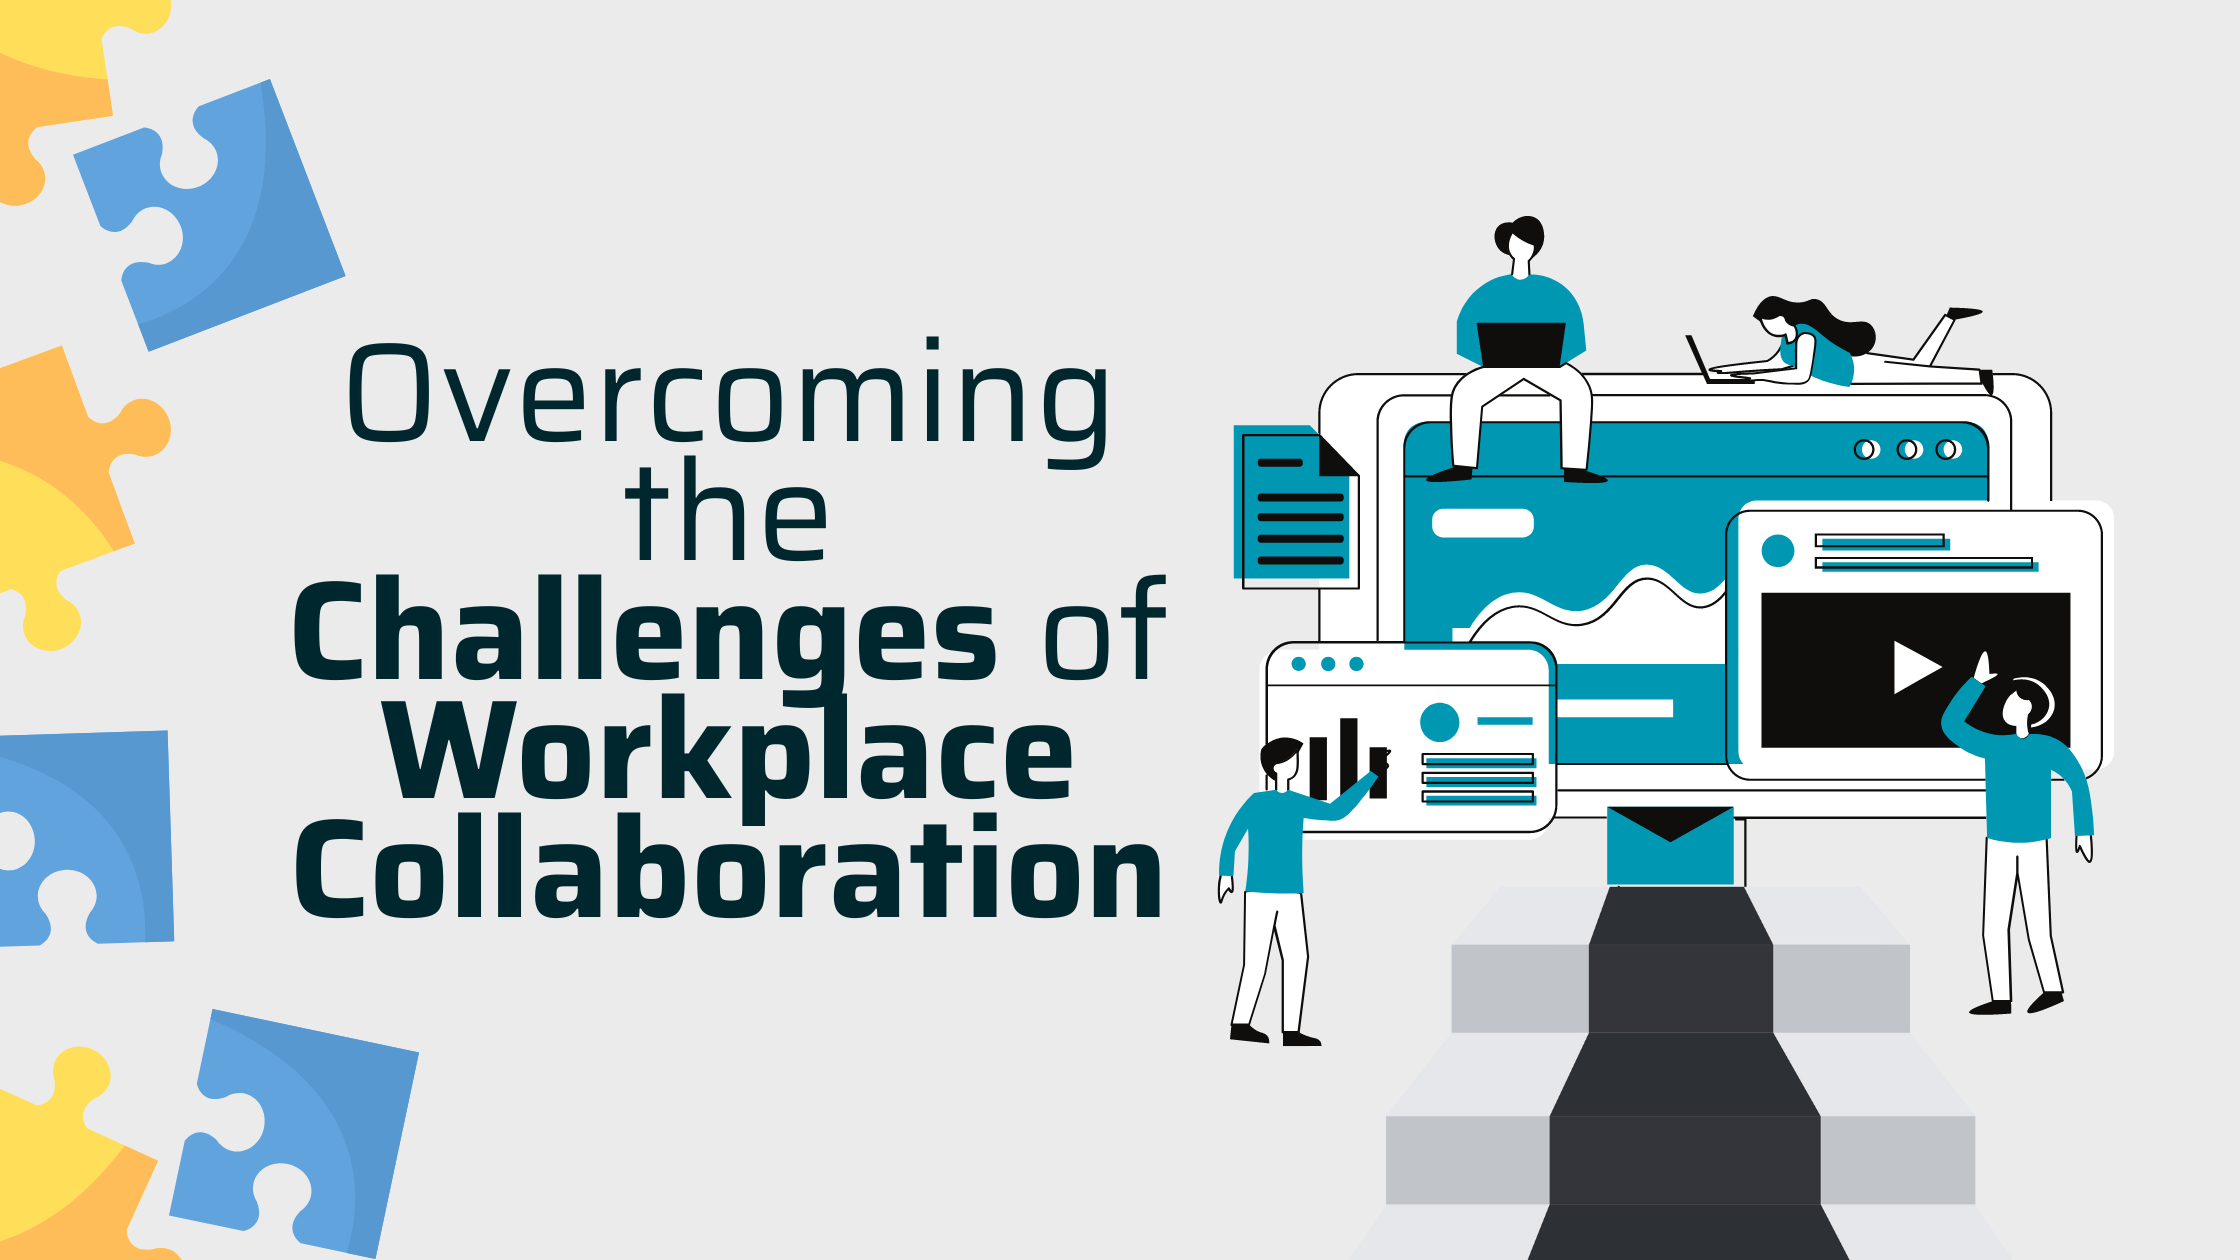 Overcoming the Challenges of Workplace Collaboration